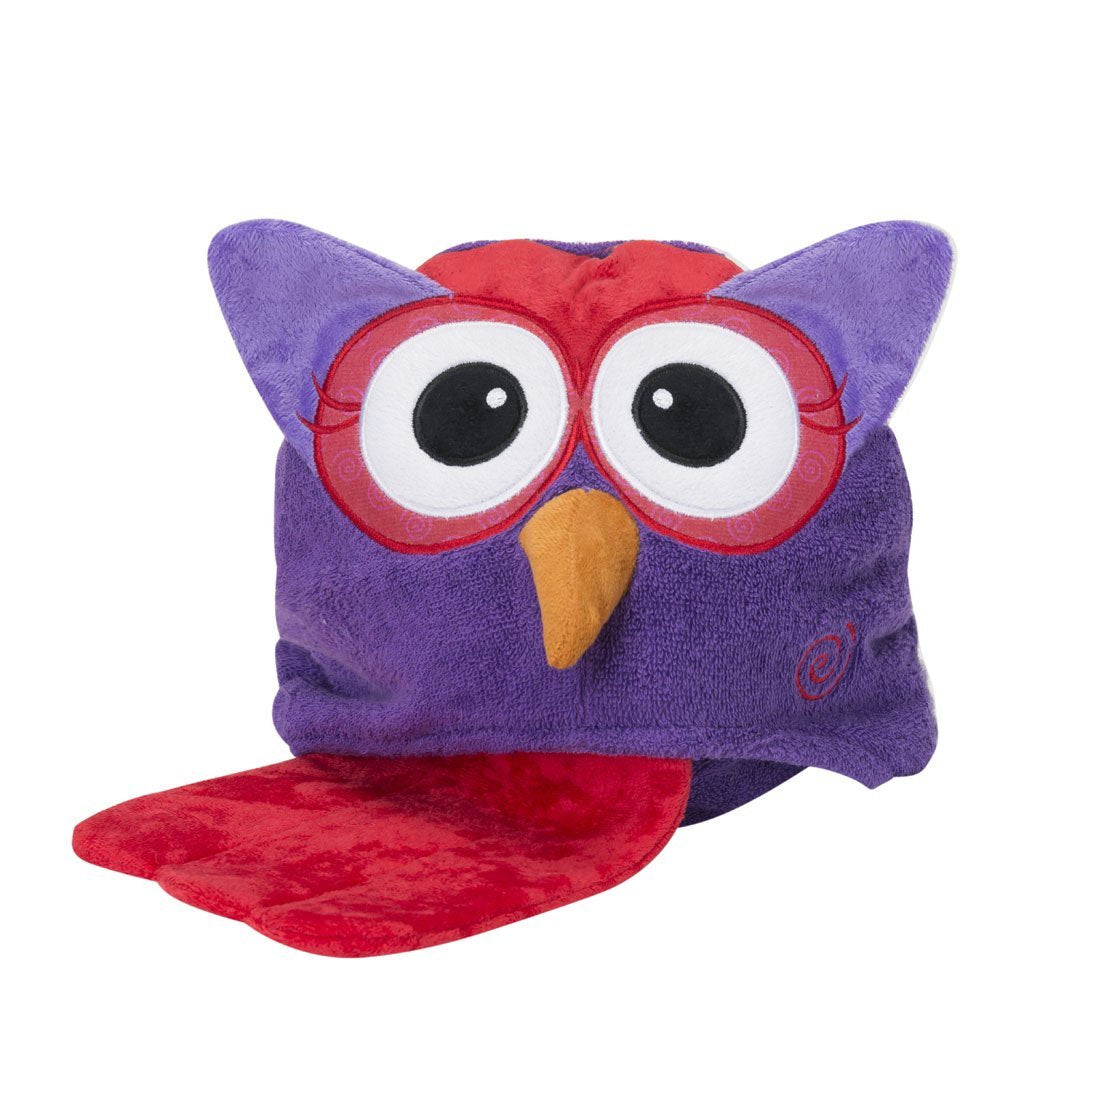 Zoocchini Hooded Towel - Olive the Owl